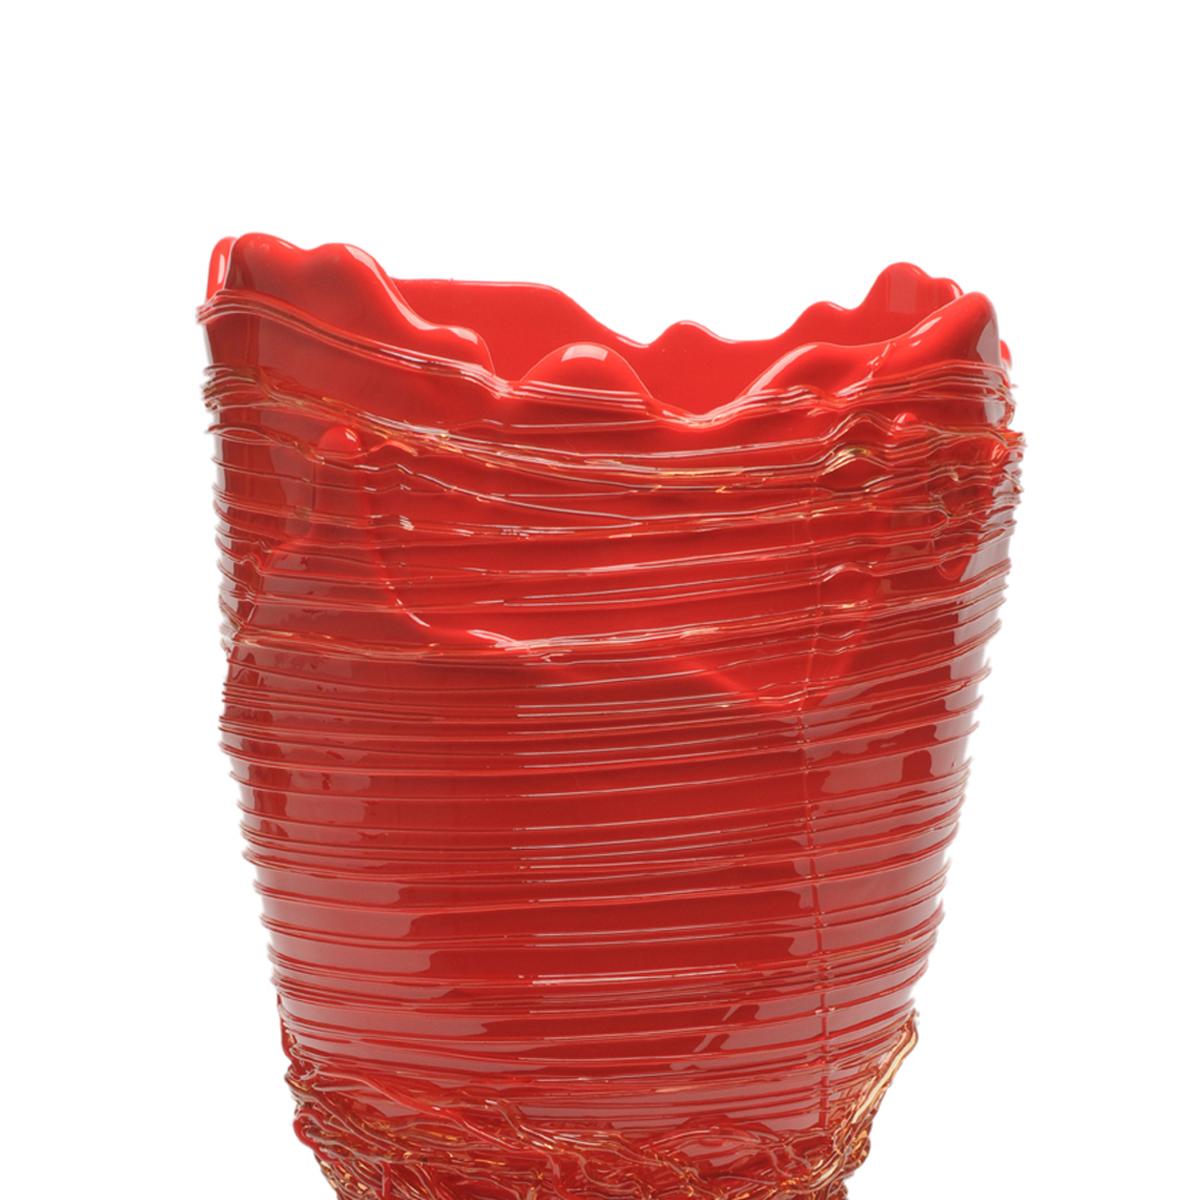 Spaghetti vase, red.

Vase in soft resin designed by Gaetano Pesce in 1995 for Fish Design collection.

Measures: L ø 16cm x H 26cm

Other sizes available.

Colours: Red.
Vase in soft resin designed by Gaetano Pesce in 1995 for Fish Design